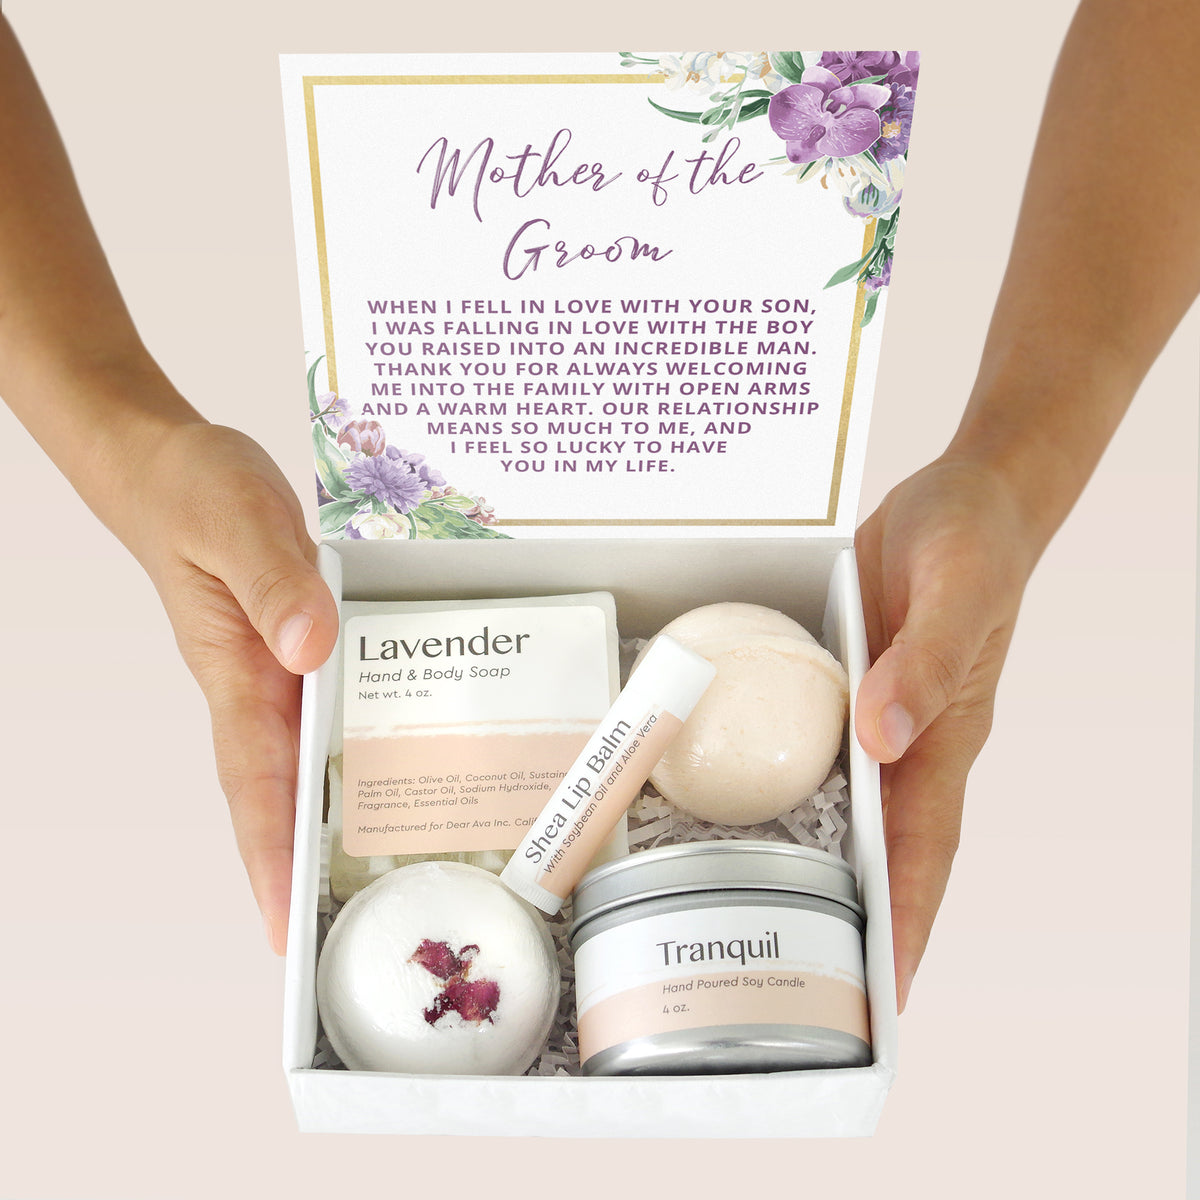 Mother of the Groom Spa Gift Box